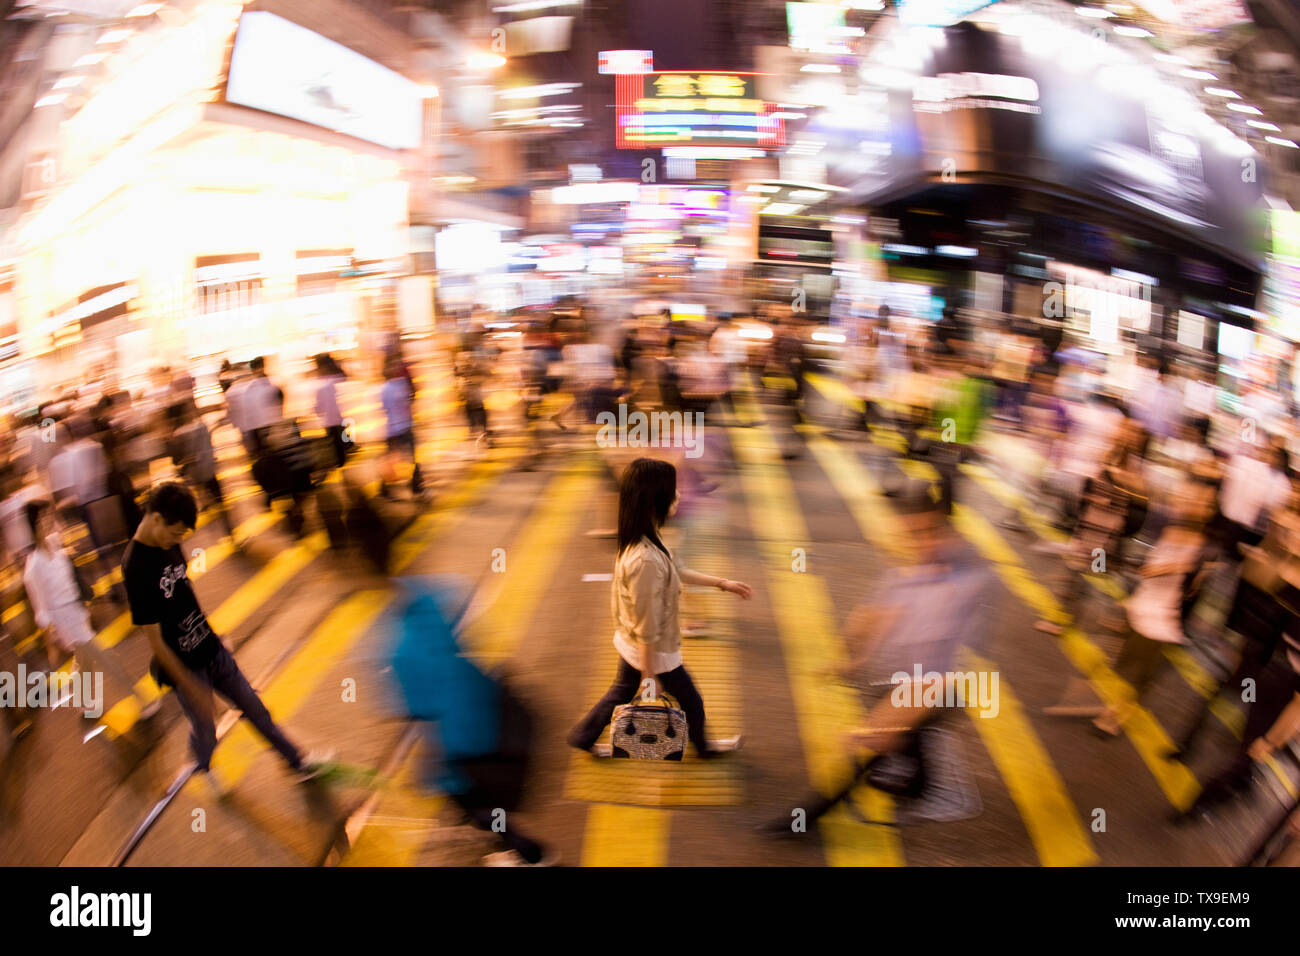 Elevated view of a pedestrian crossing a road in Hong Kong. China. Stock Photo